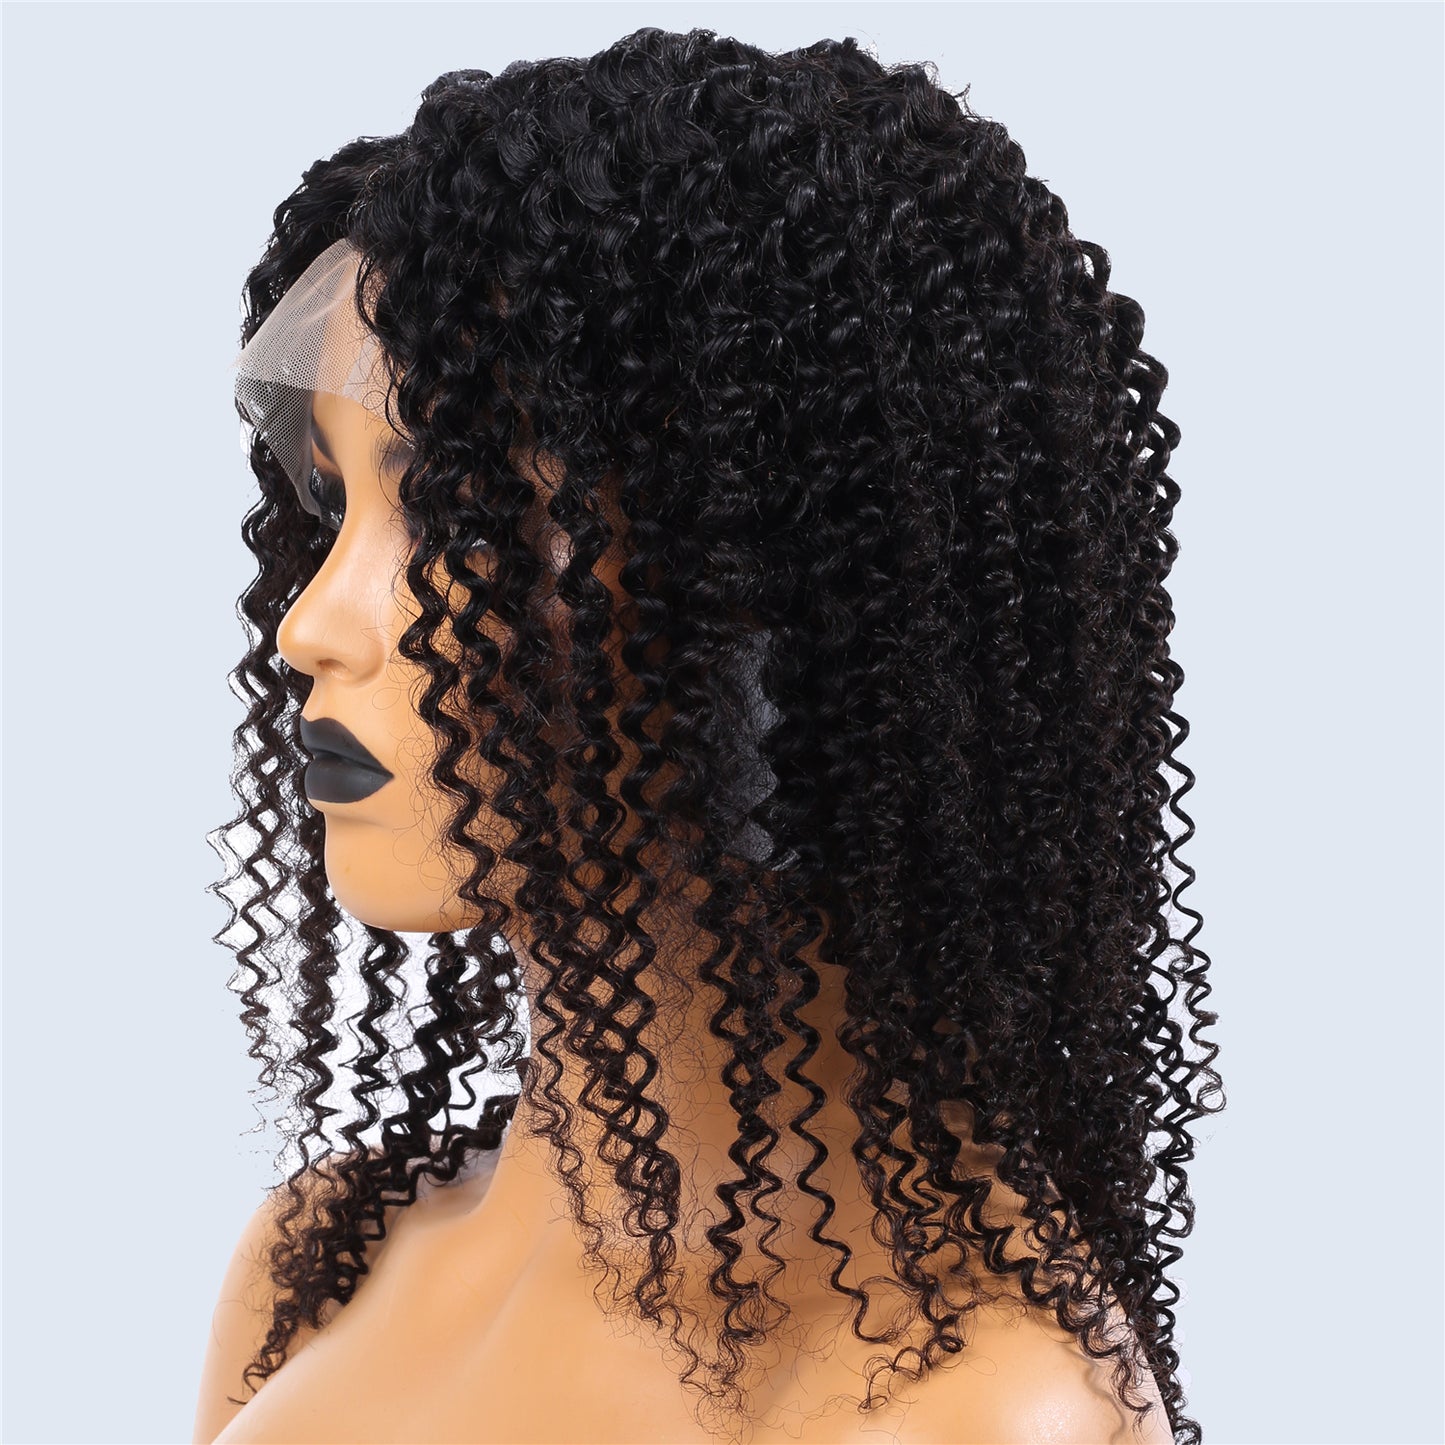 Real Human Hair Full Lace Wig Curly Style